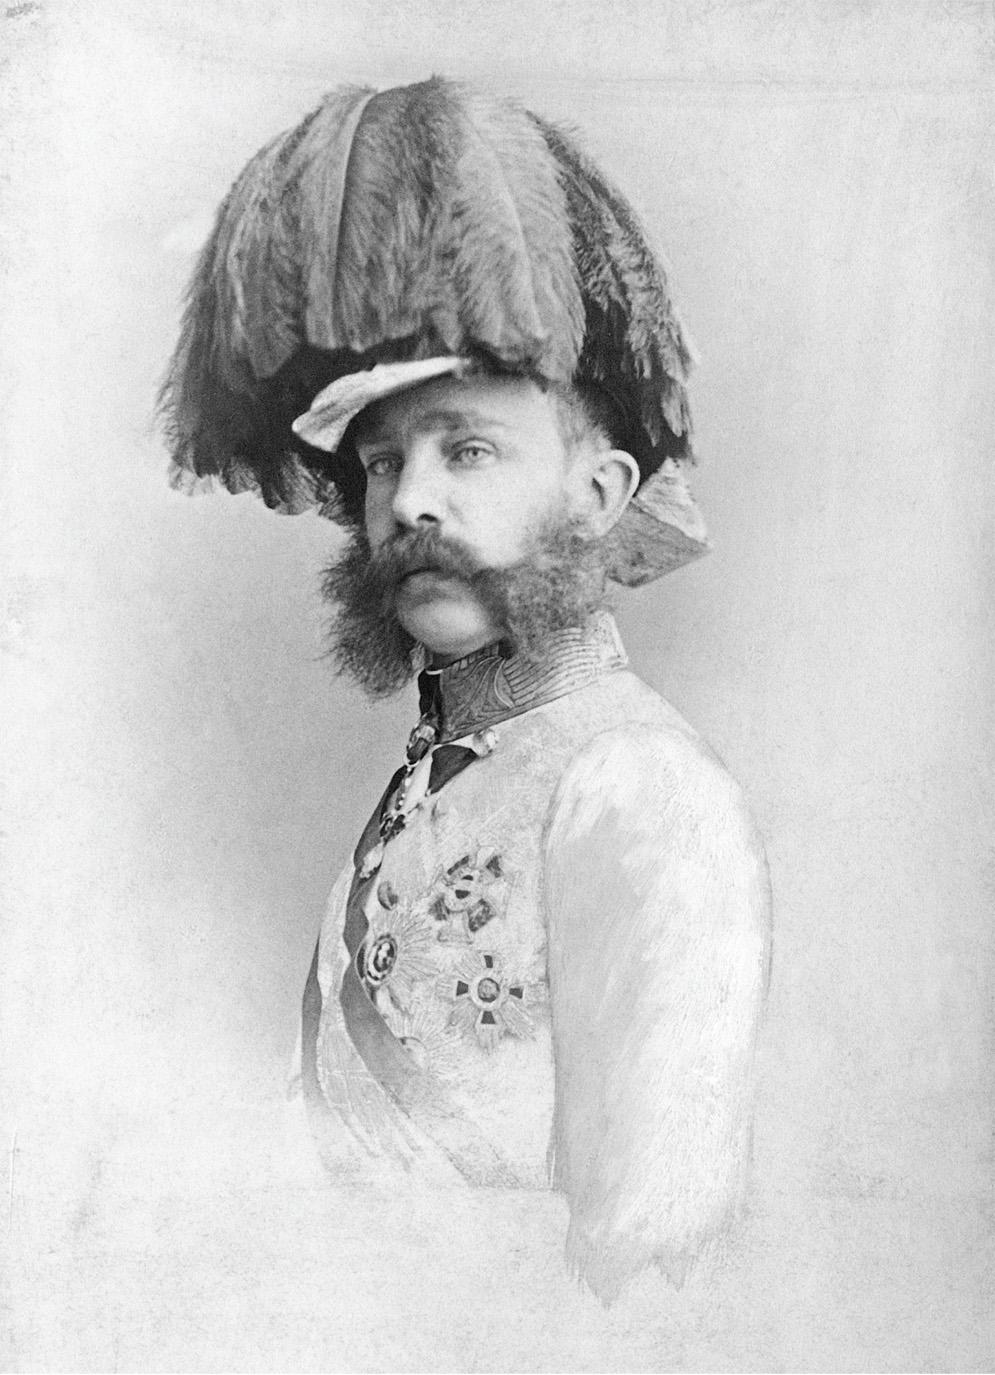 Francis Joseph (1830 1916) ruled Austria and then Austria-Hungary from 1848 until his death. In this 1865 photo, the young emperor is shown in military gala attire, one of his preferred uniforms.